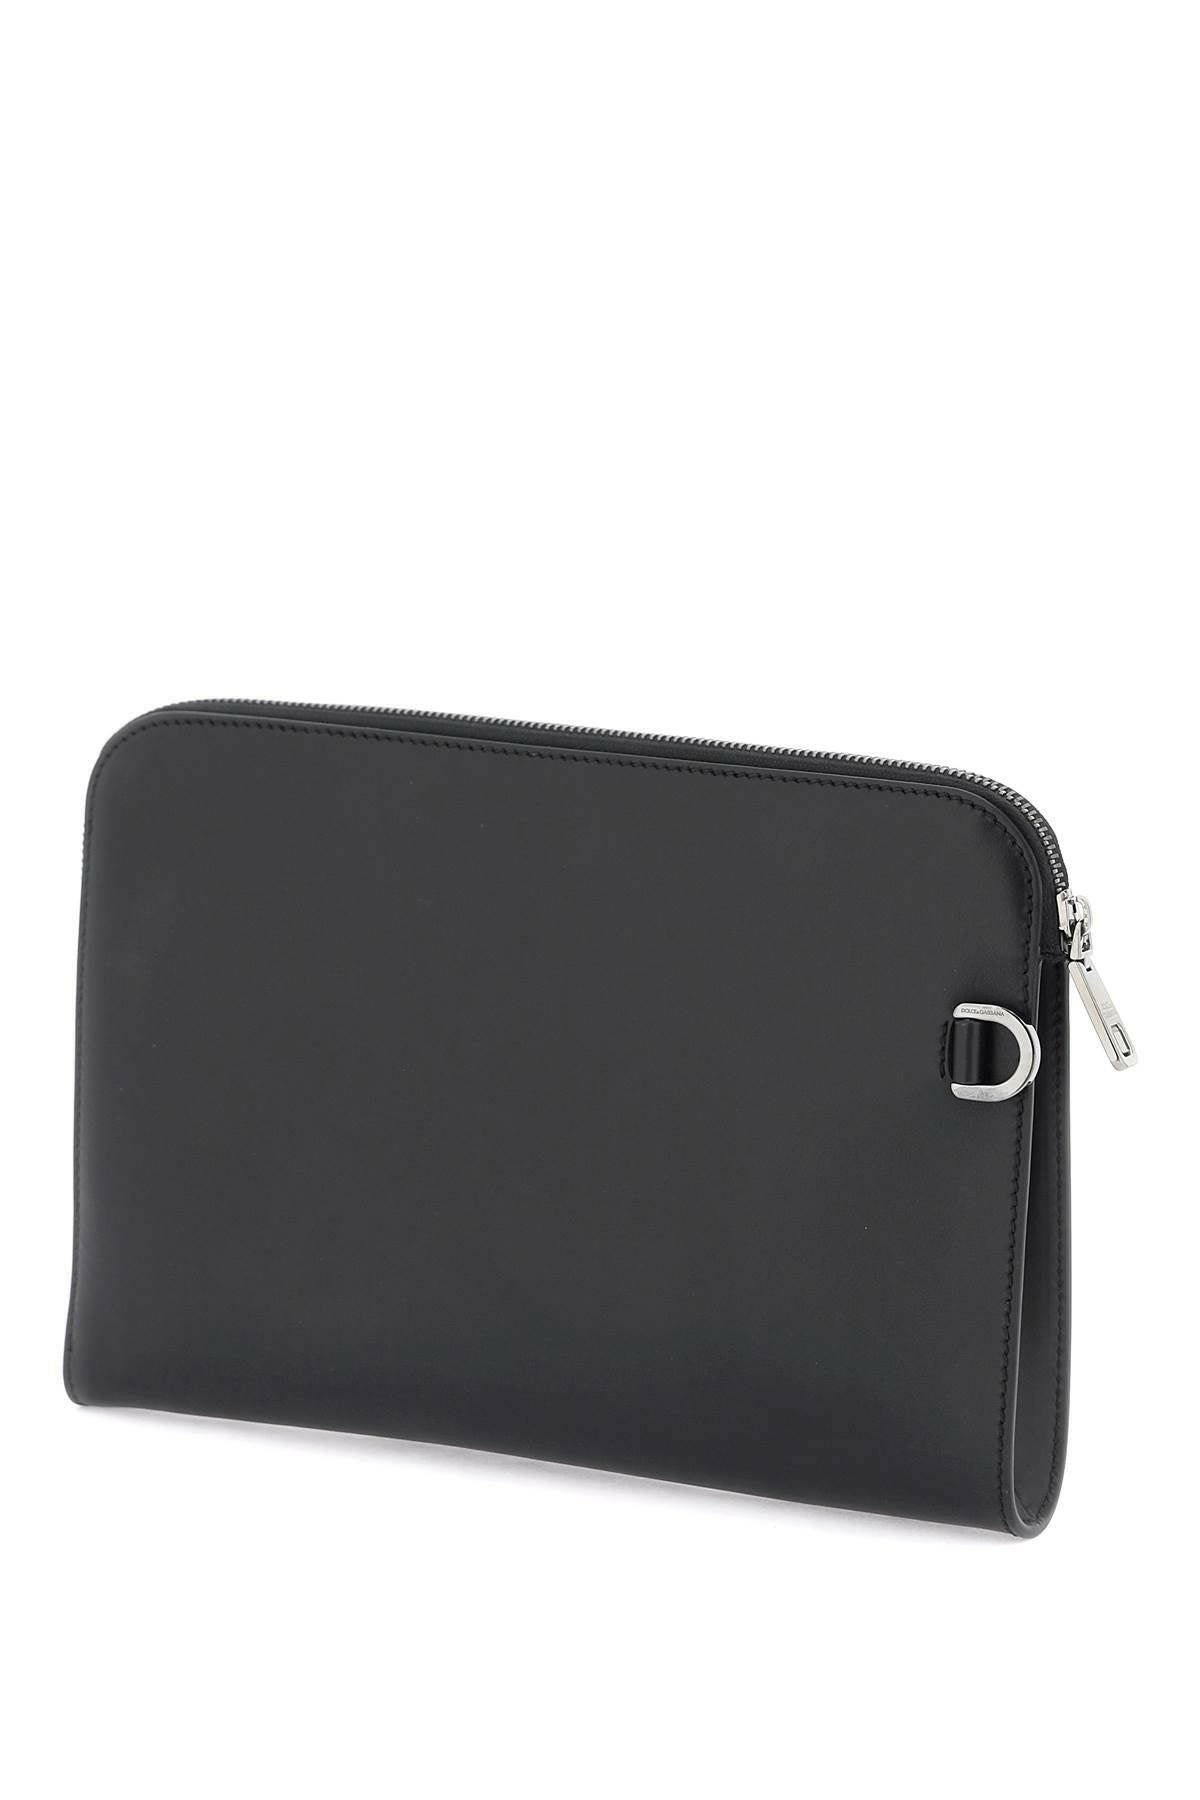 Dolce & Gabbana Pouch With Embossed Logo - JOHN JULIA